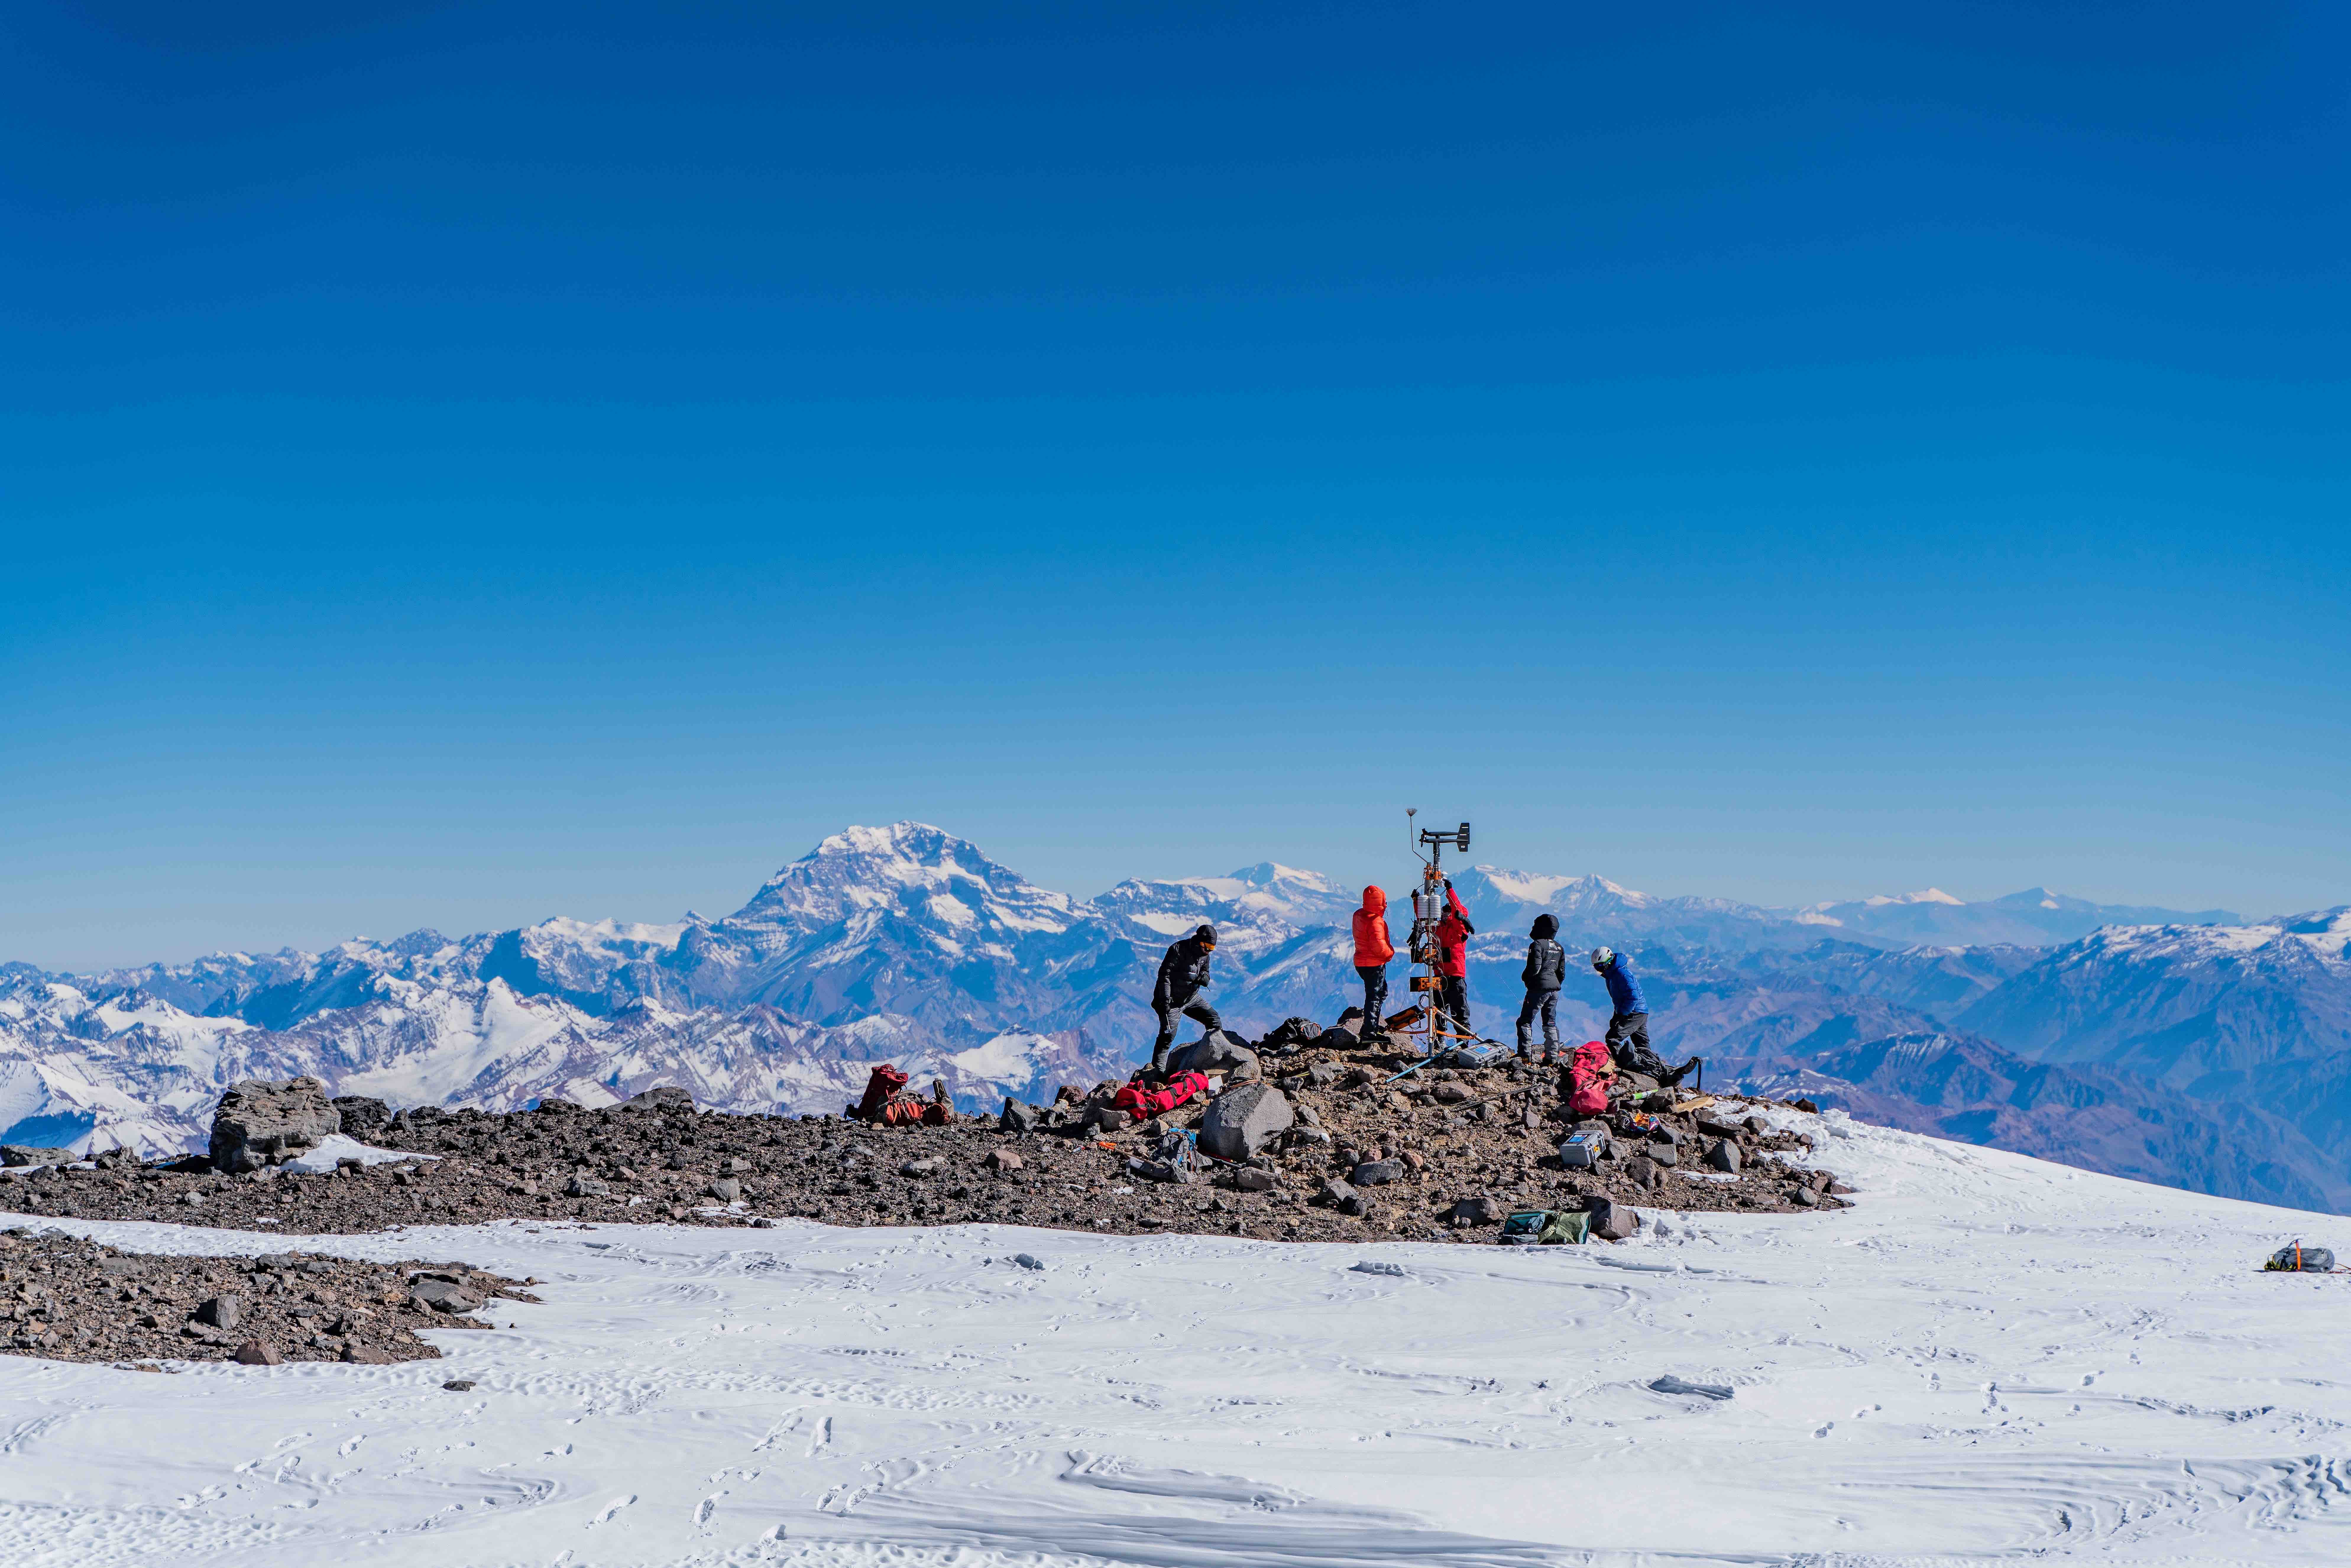 The expedition team installs the highest weather station in the Southern and Western Hemispheres at 6,505 metres. Photo shot by Armanda Vega for National Geographic.